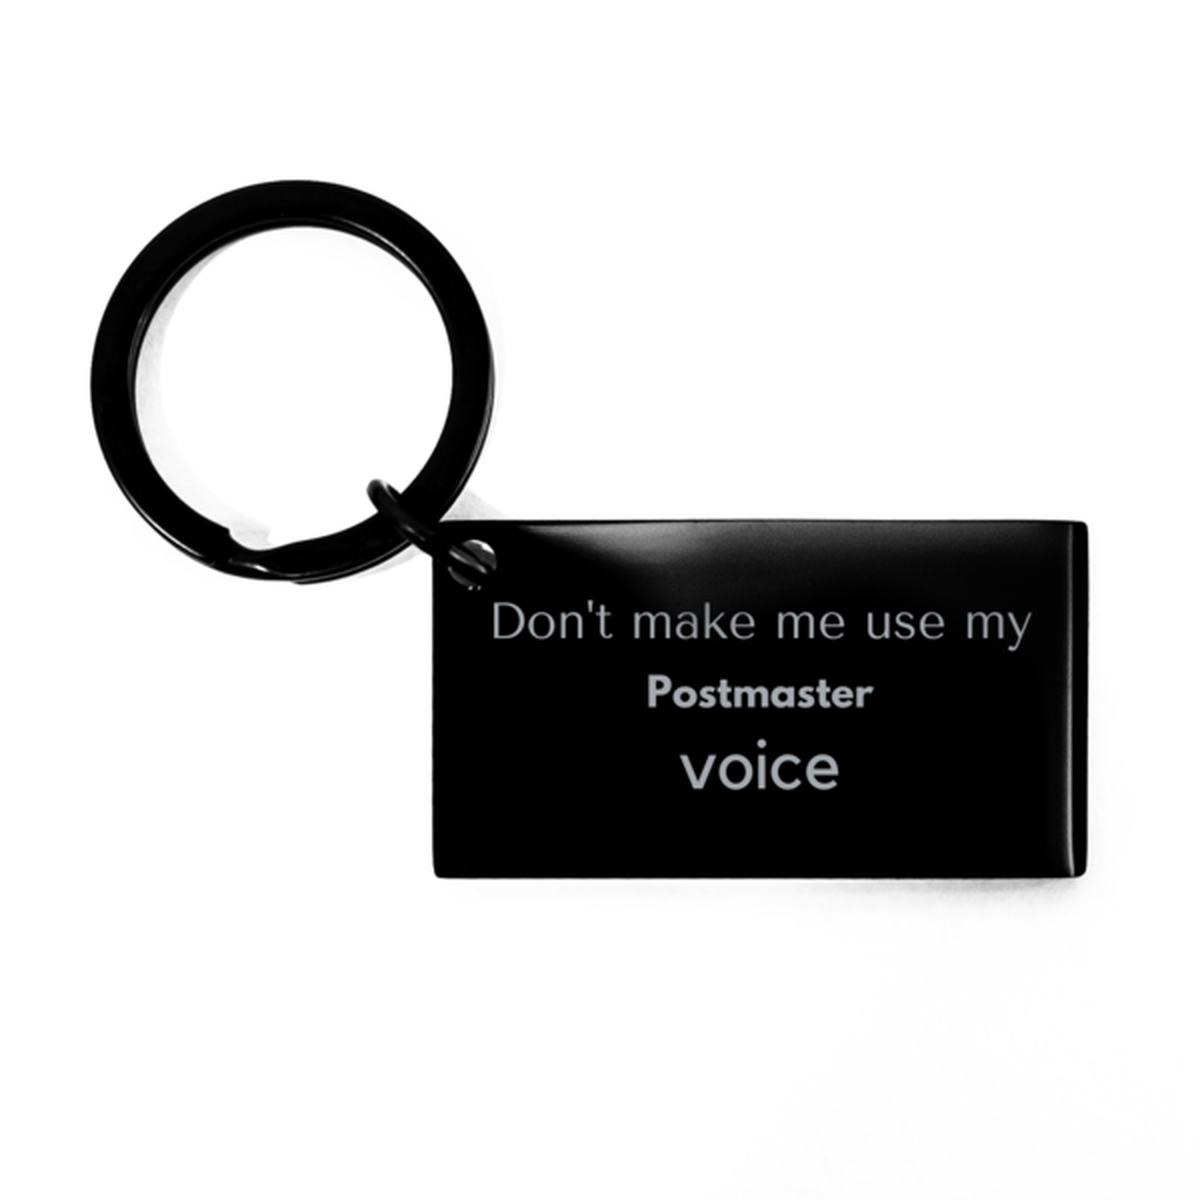 Don't make me use my Postmaster voice, Sarcasm Postmaster Gifts, Christmas Postmaster Keychain Birthday Unique Gifts For Postmaster Coworkers, Men, Women, Colleague, Friends